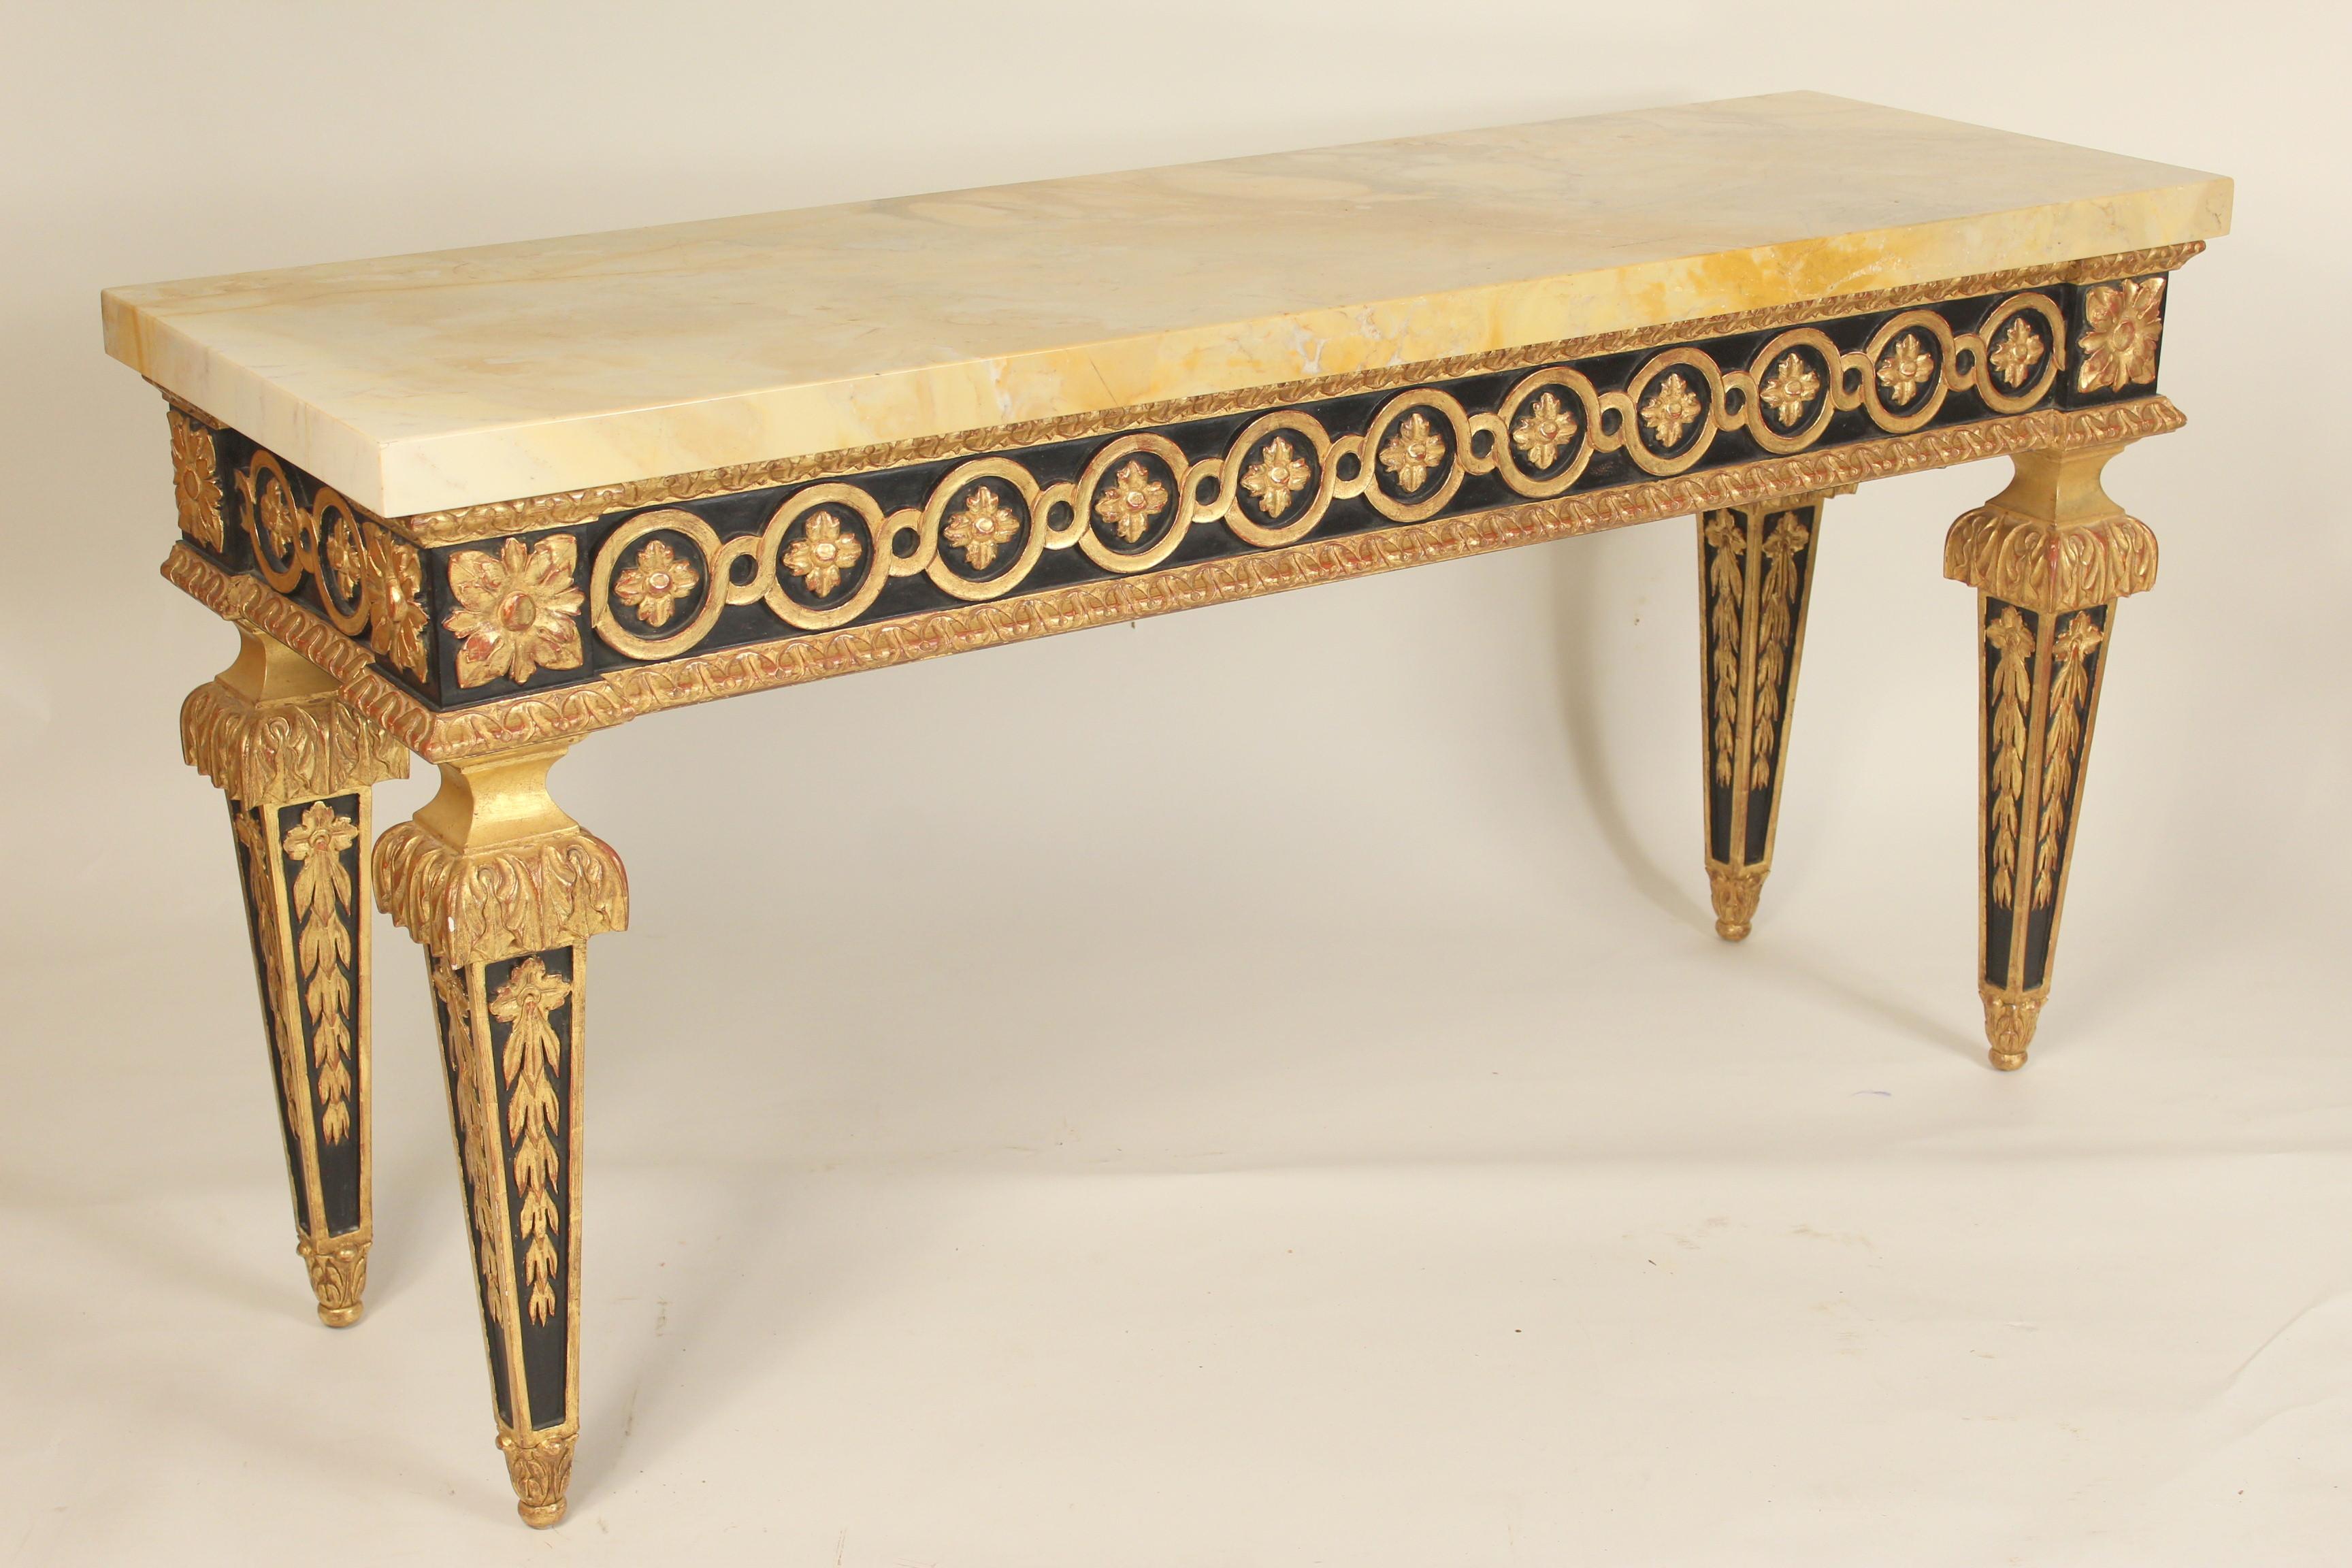 Pair of Louis XVI style painted and gilt decorated console tables with veneered marble tops, circa 2000. The gilding on these consoles is Dutch foil. The sides of the tops has .75